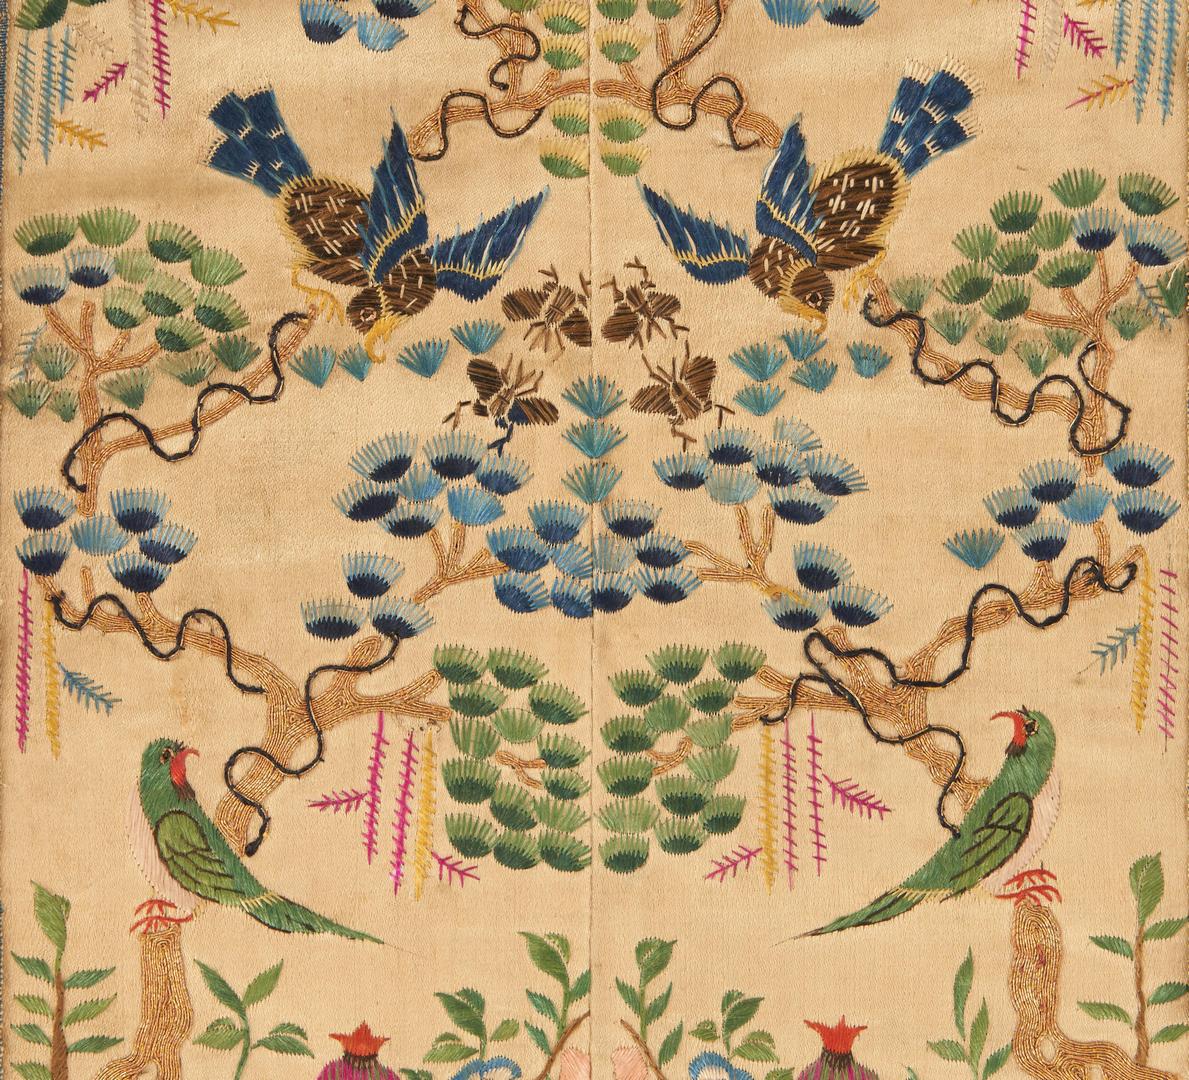 Lot 314: Two (2) Chinese Silk Embroidered Textiles